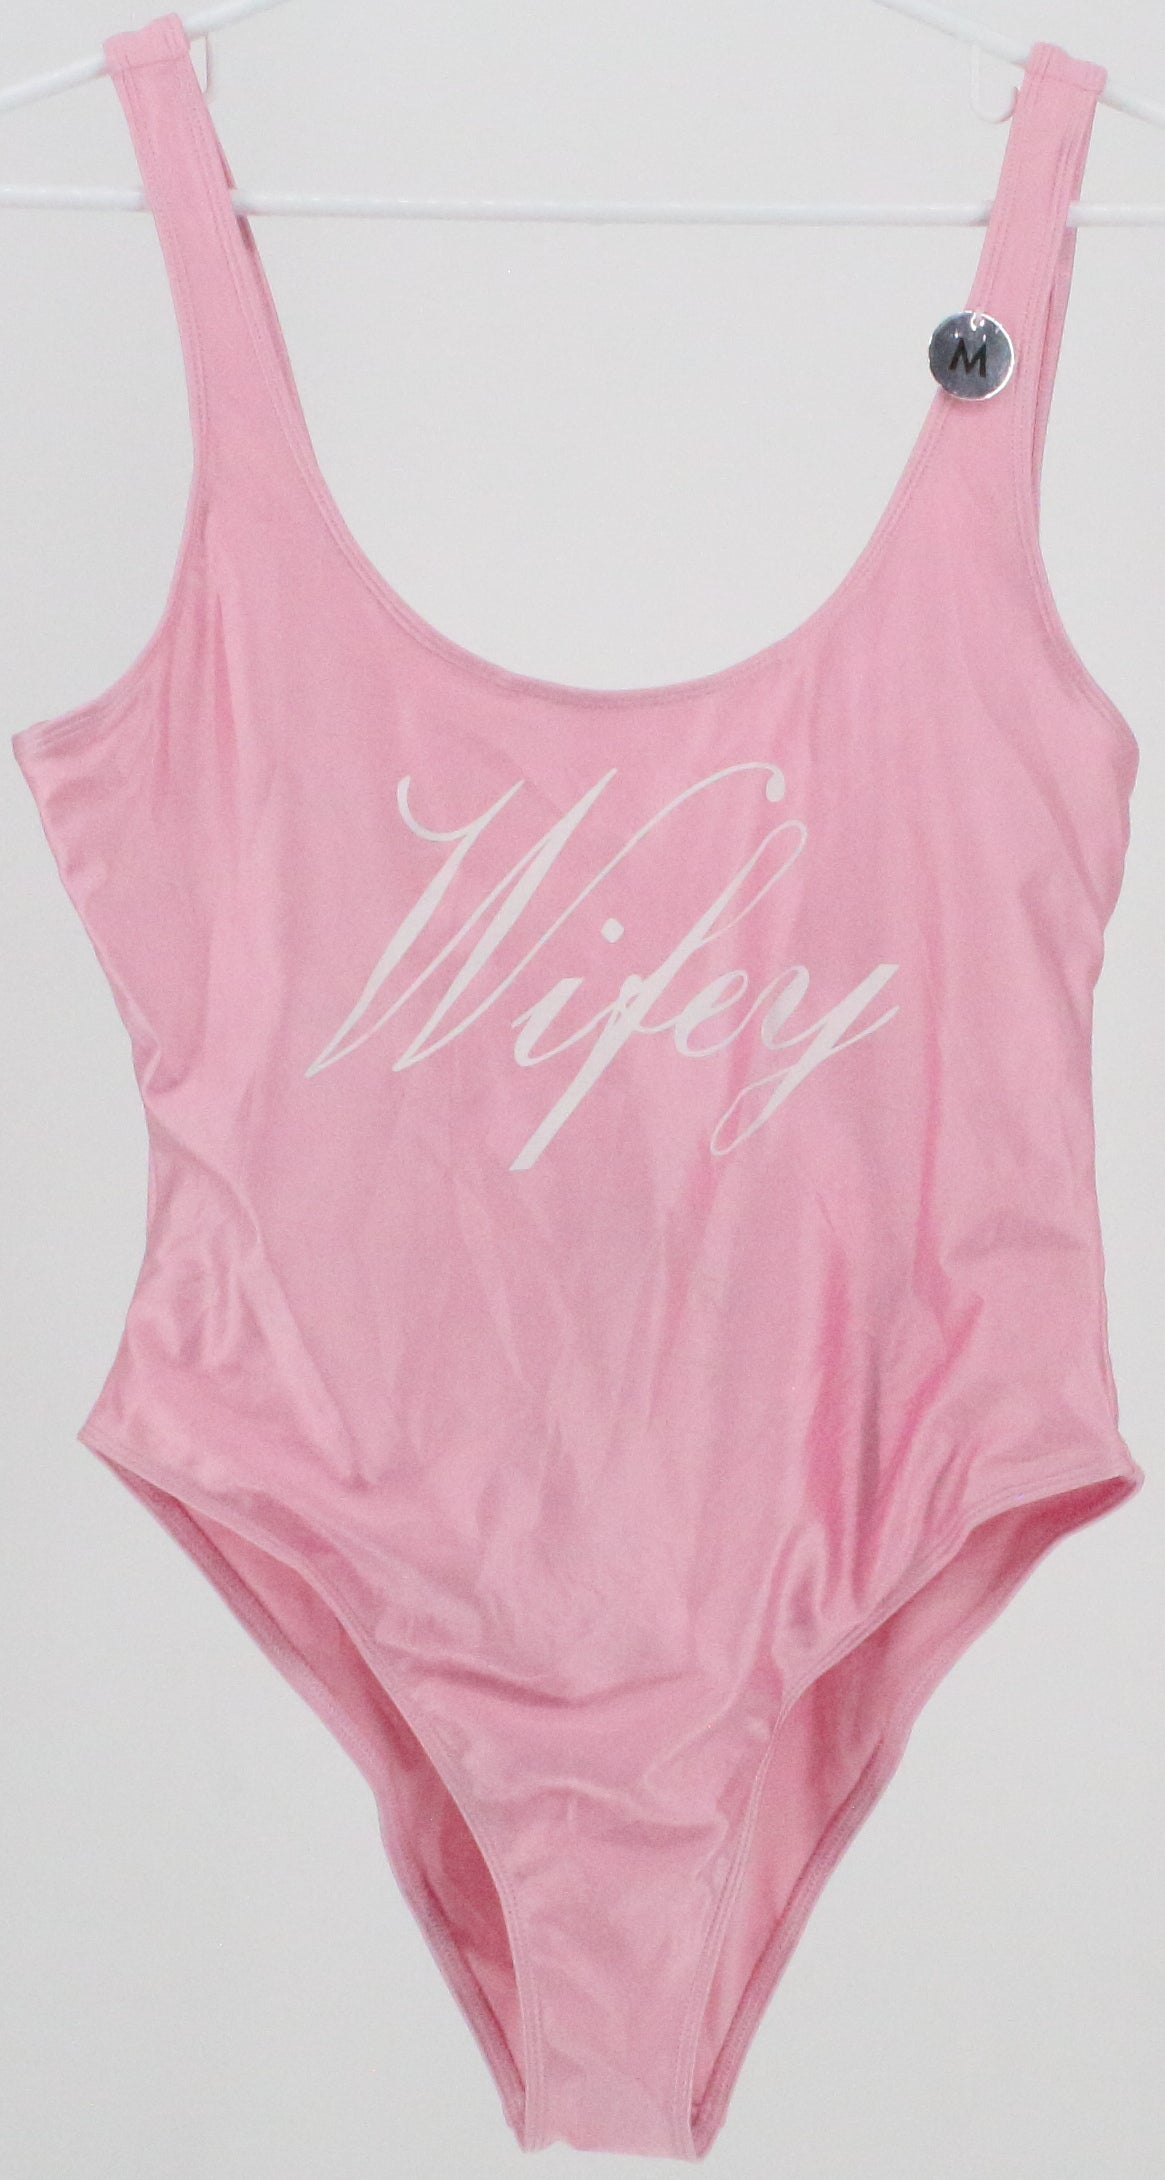 Forever 21 Wifey Pink Bodysuit